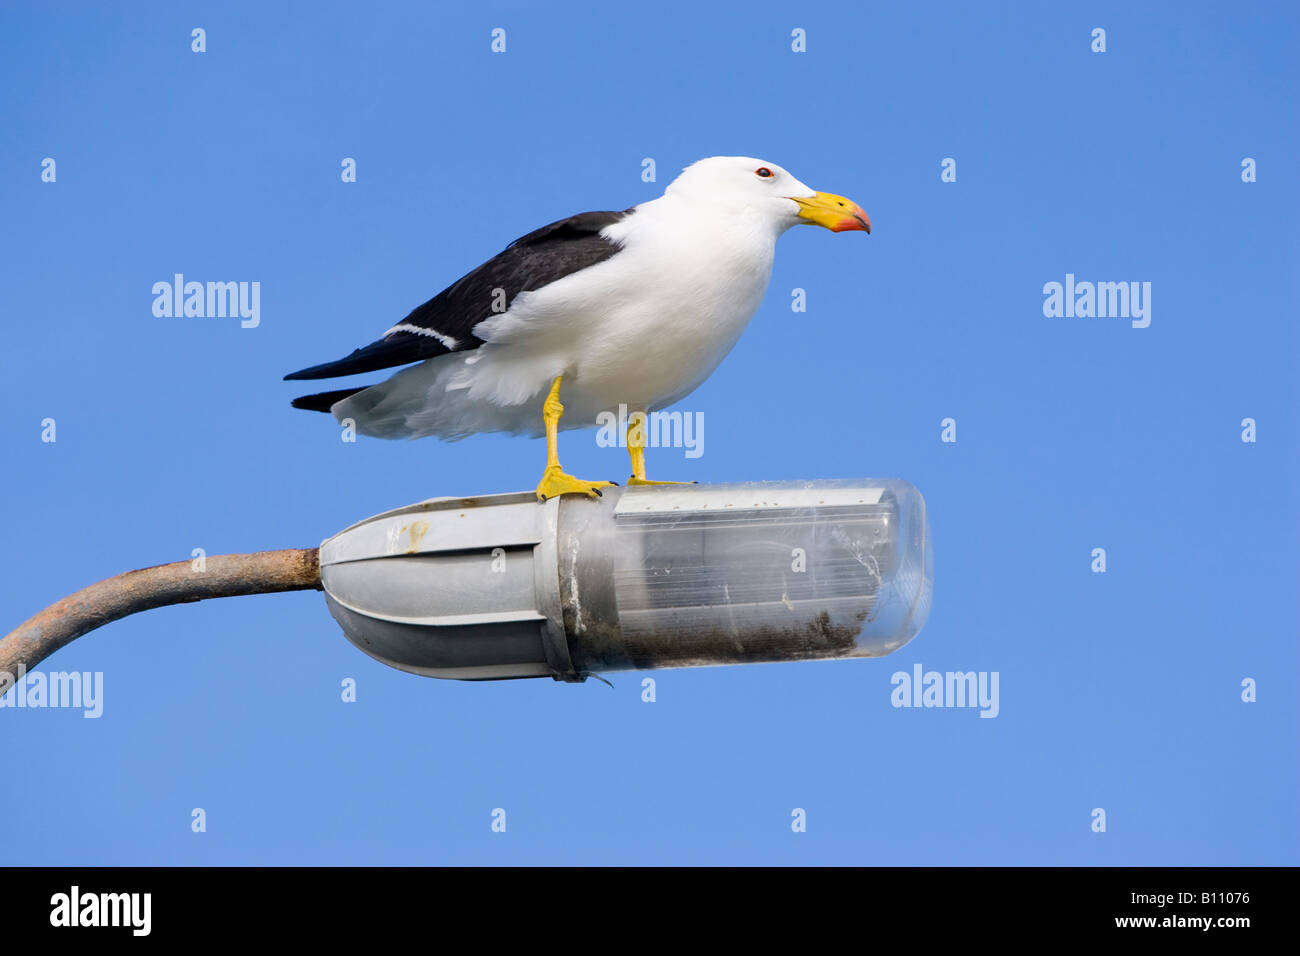 A Pacific Gull (Larus pacificus) perched on a street light. Esperance, Western Australia Stock Photo